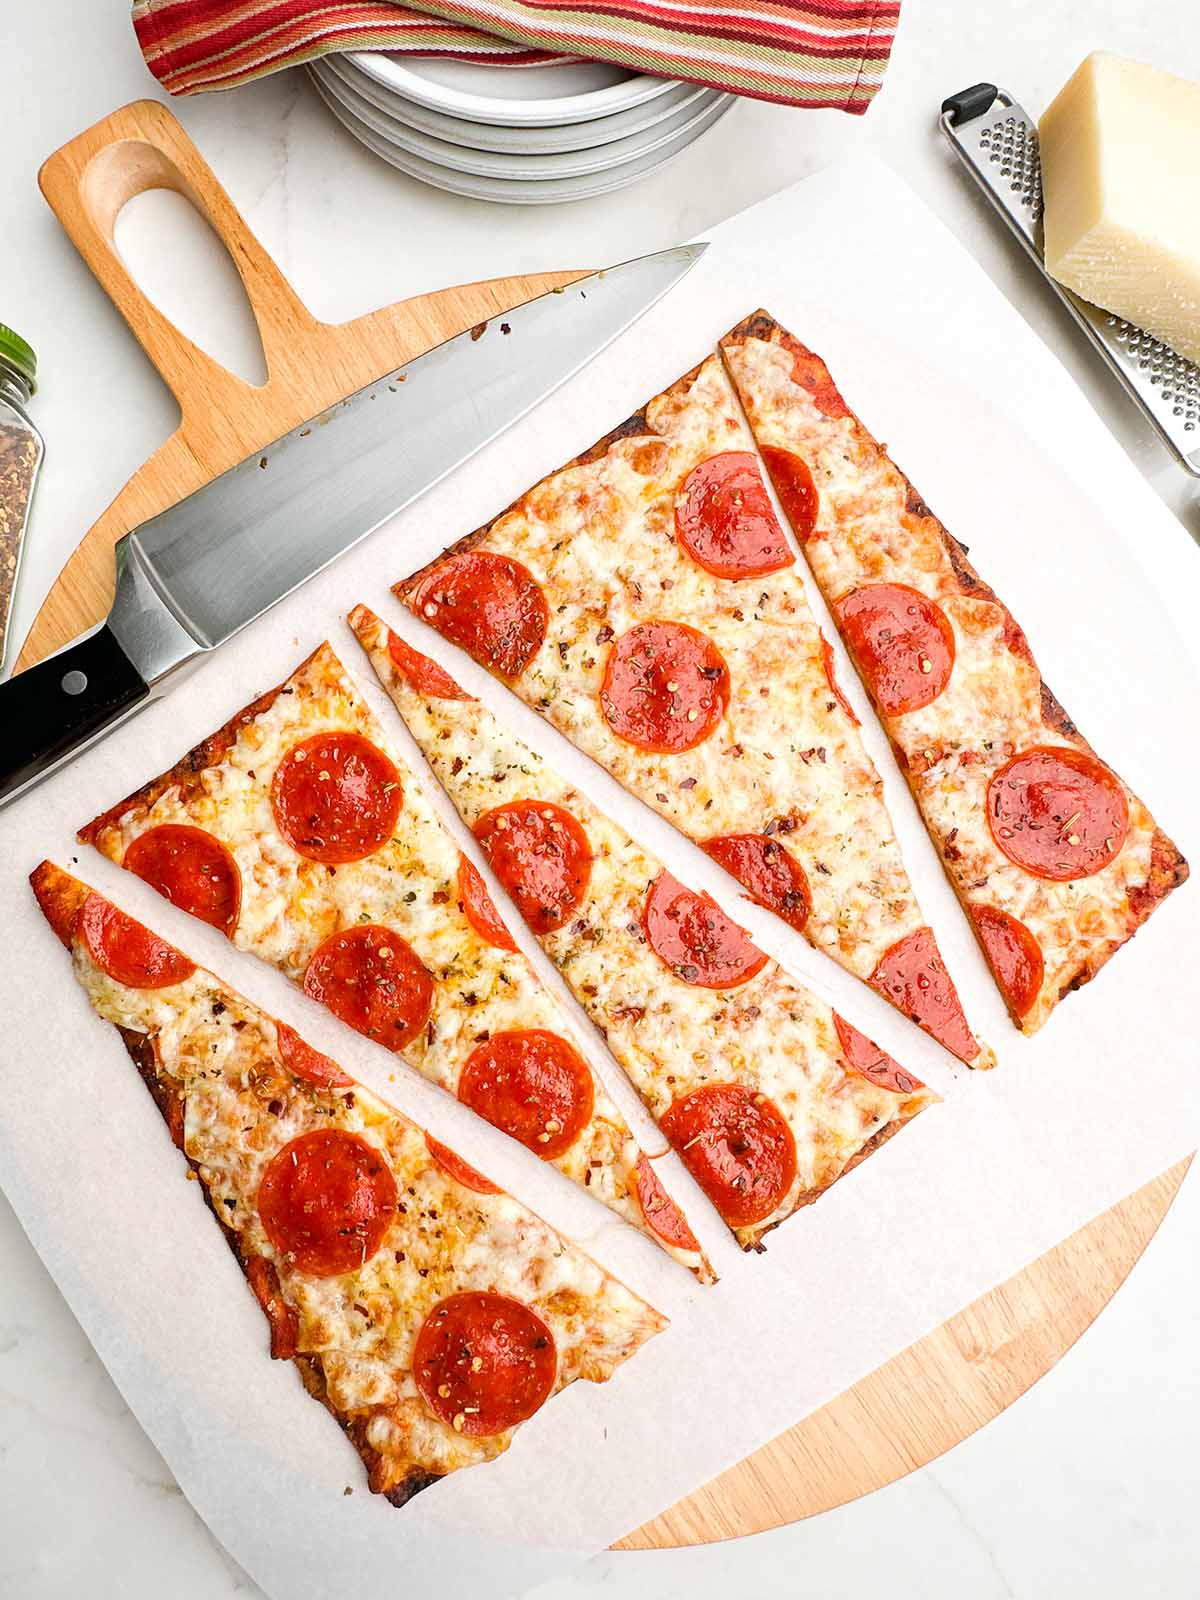 pepperoni lavash pizza cut into triangles on parchment on a wooden cutting board.